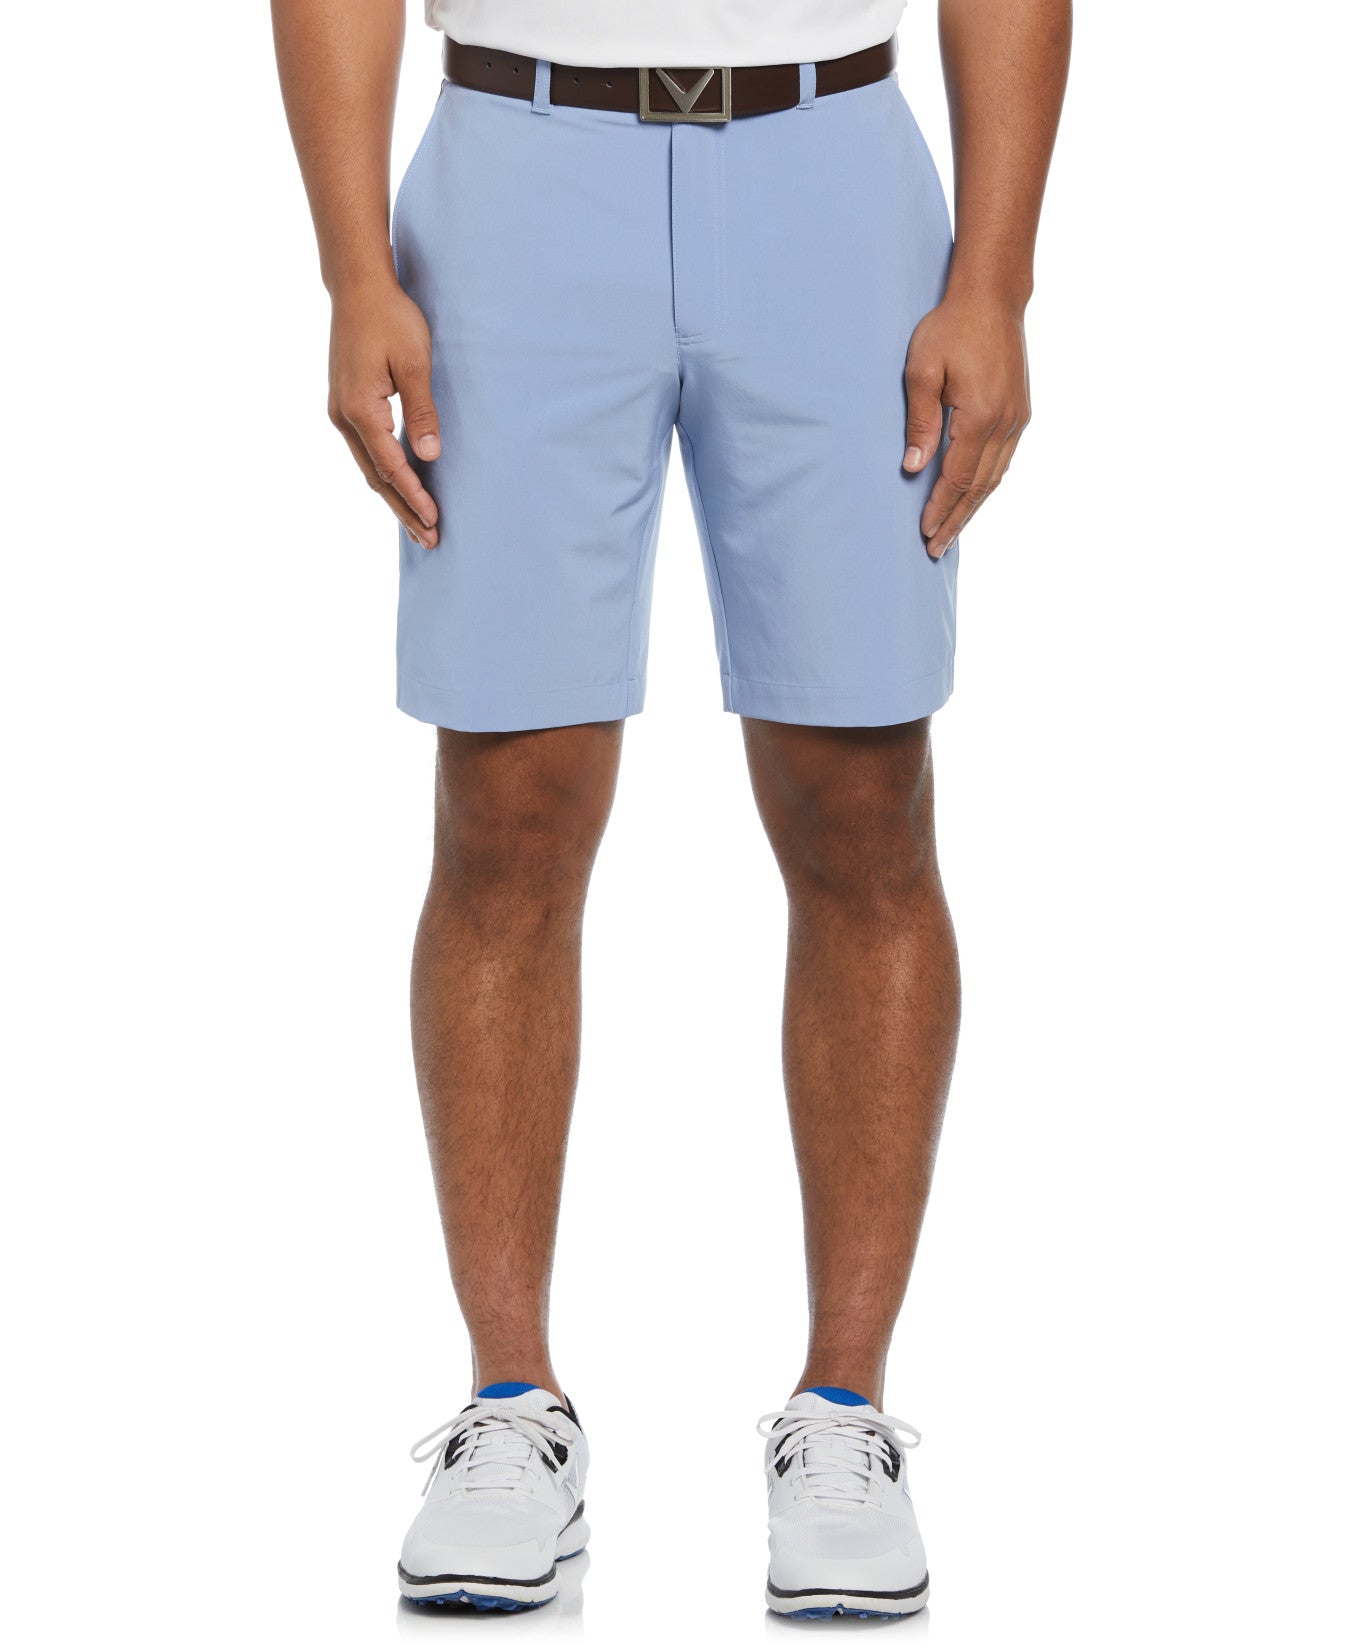 View Lightweight Tech Short With Active Waistband In Chambray information